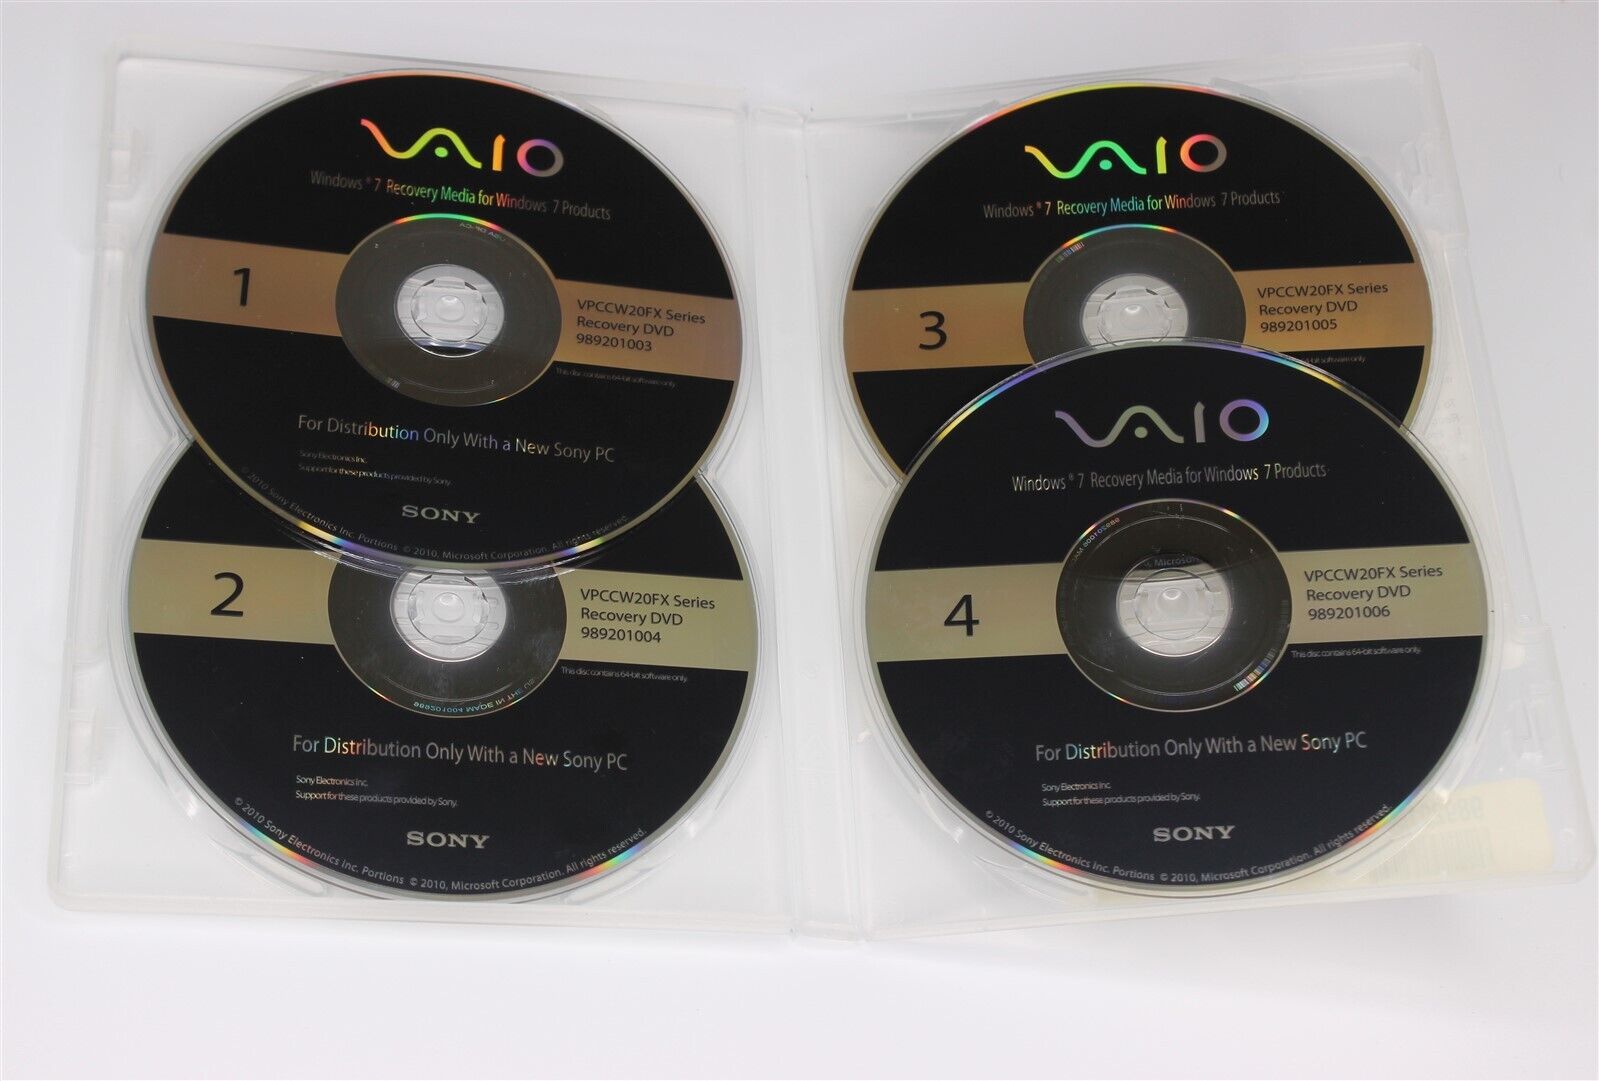 Sony Vaio Laptop Computer Recovery Discs - VPC CW20FX Series - Win 7 - 4 DVDs